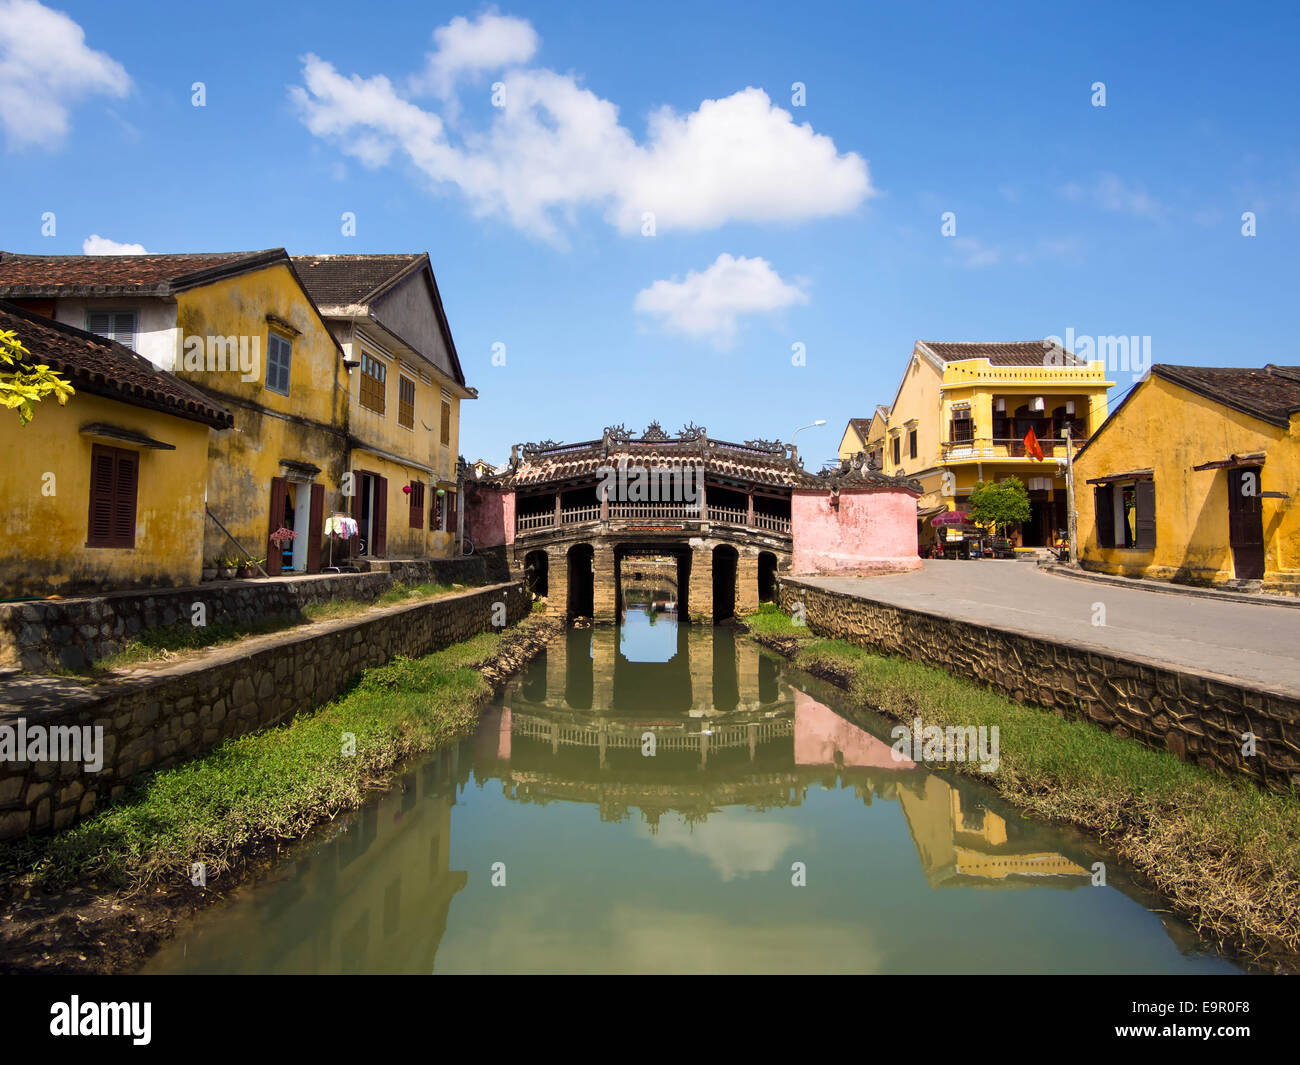 Japanese Covered Bridge in Hoi An, Central Vietnam. Stock Photo